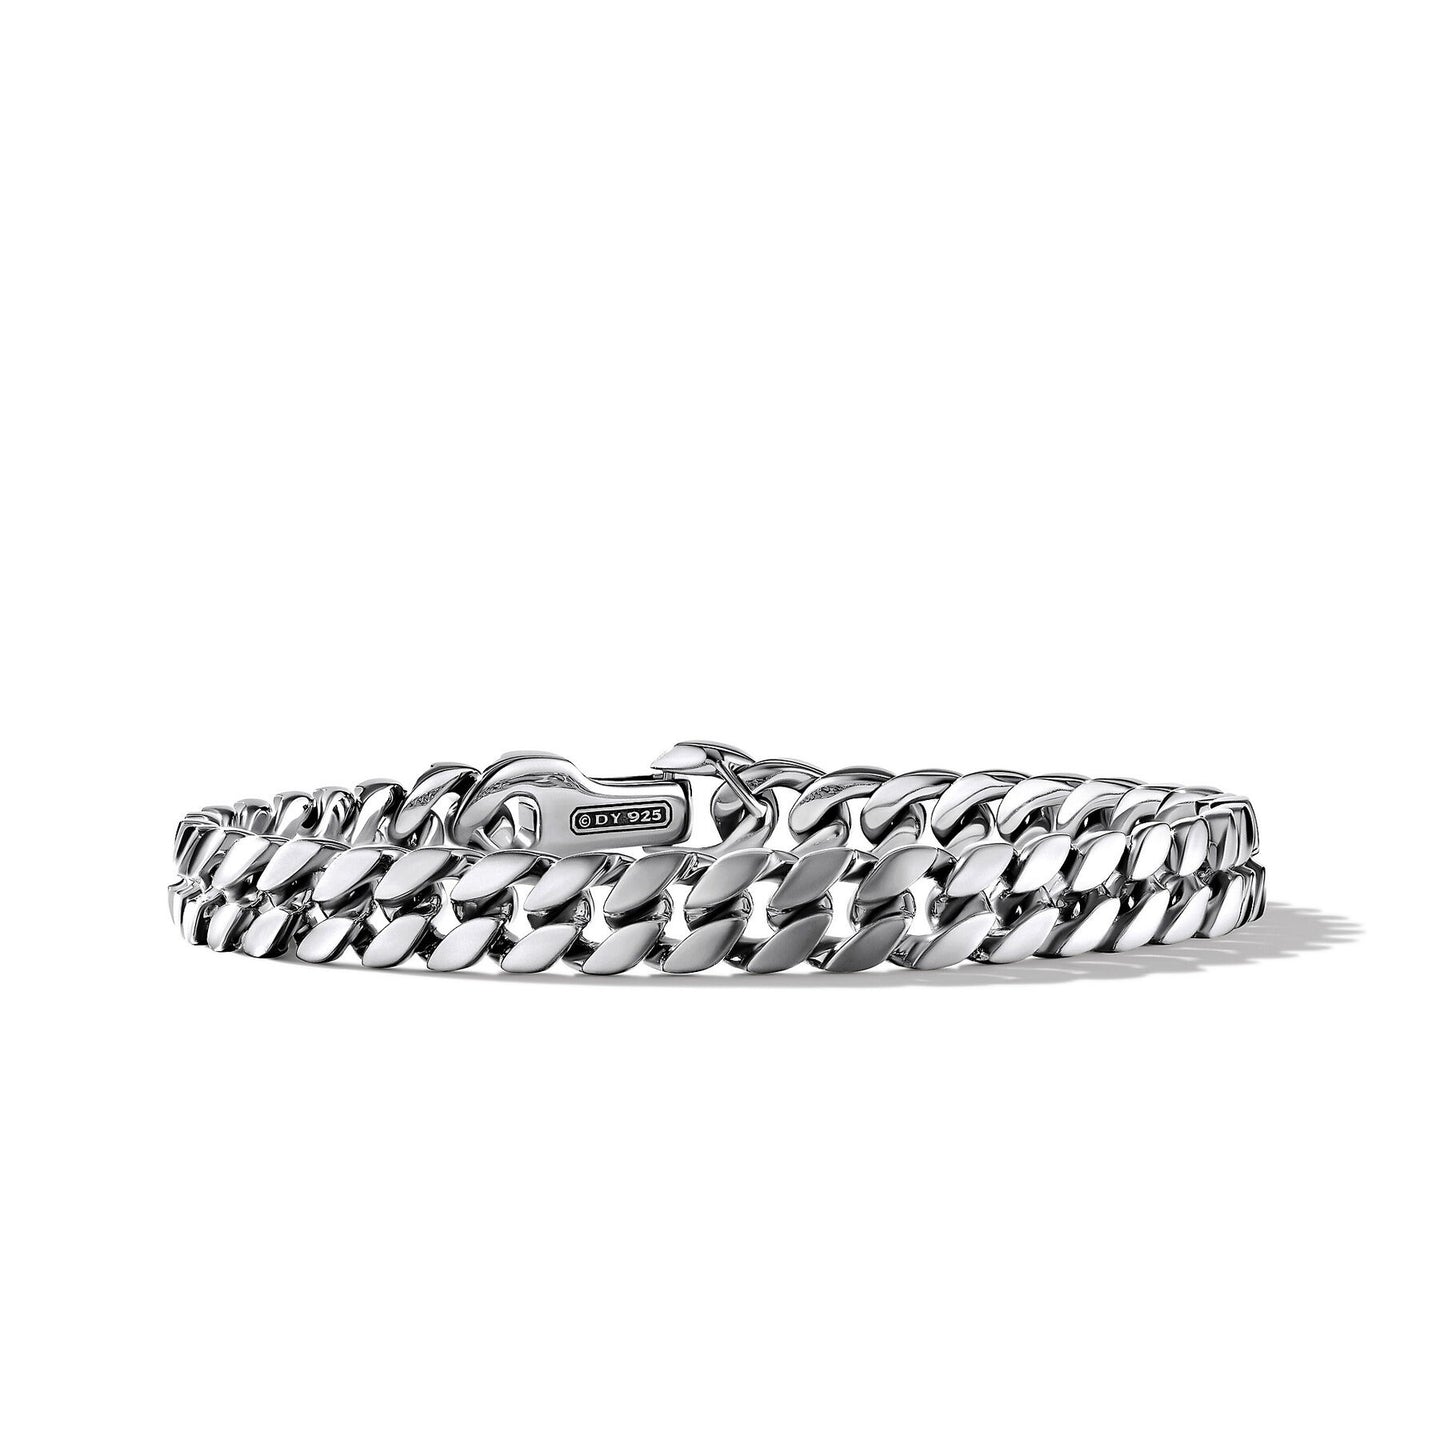 David Yurman The Chain Collection Bracelet in Sterling Silver